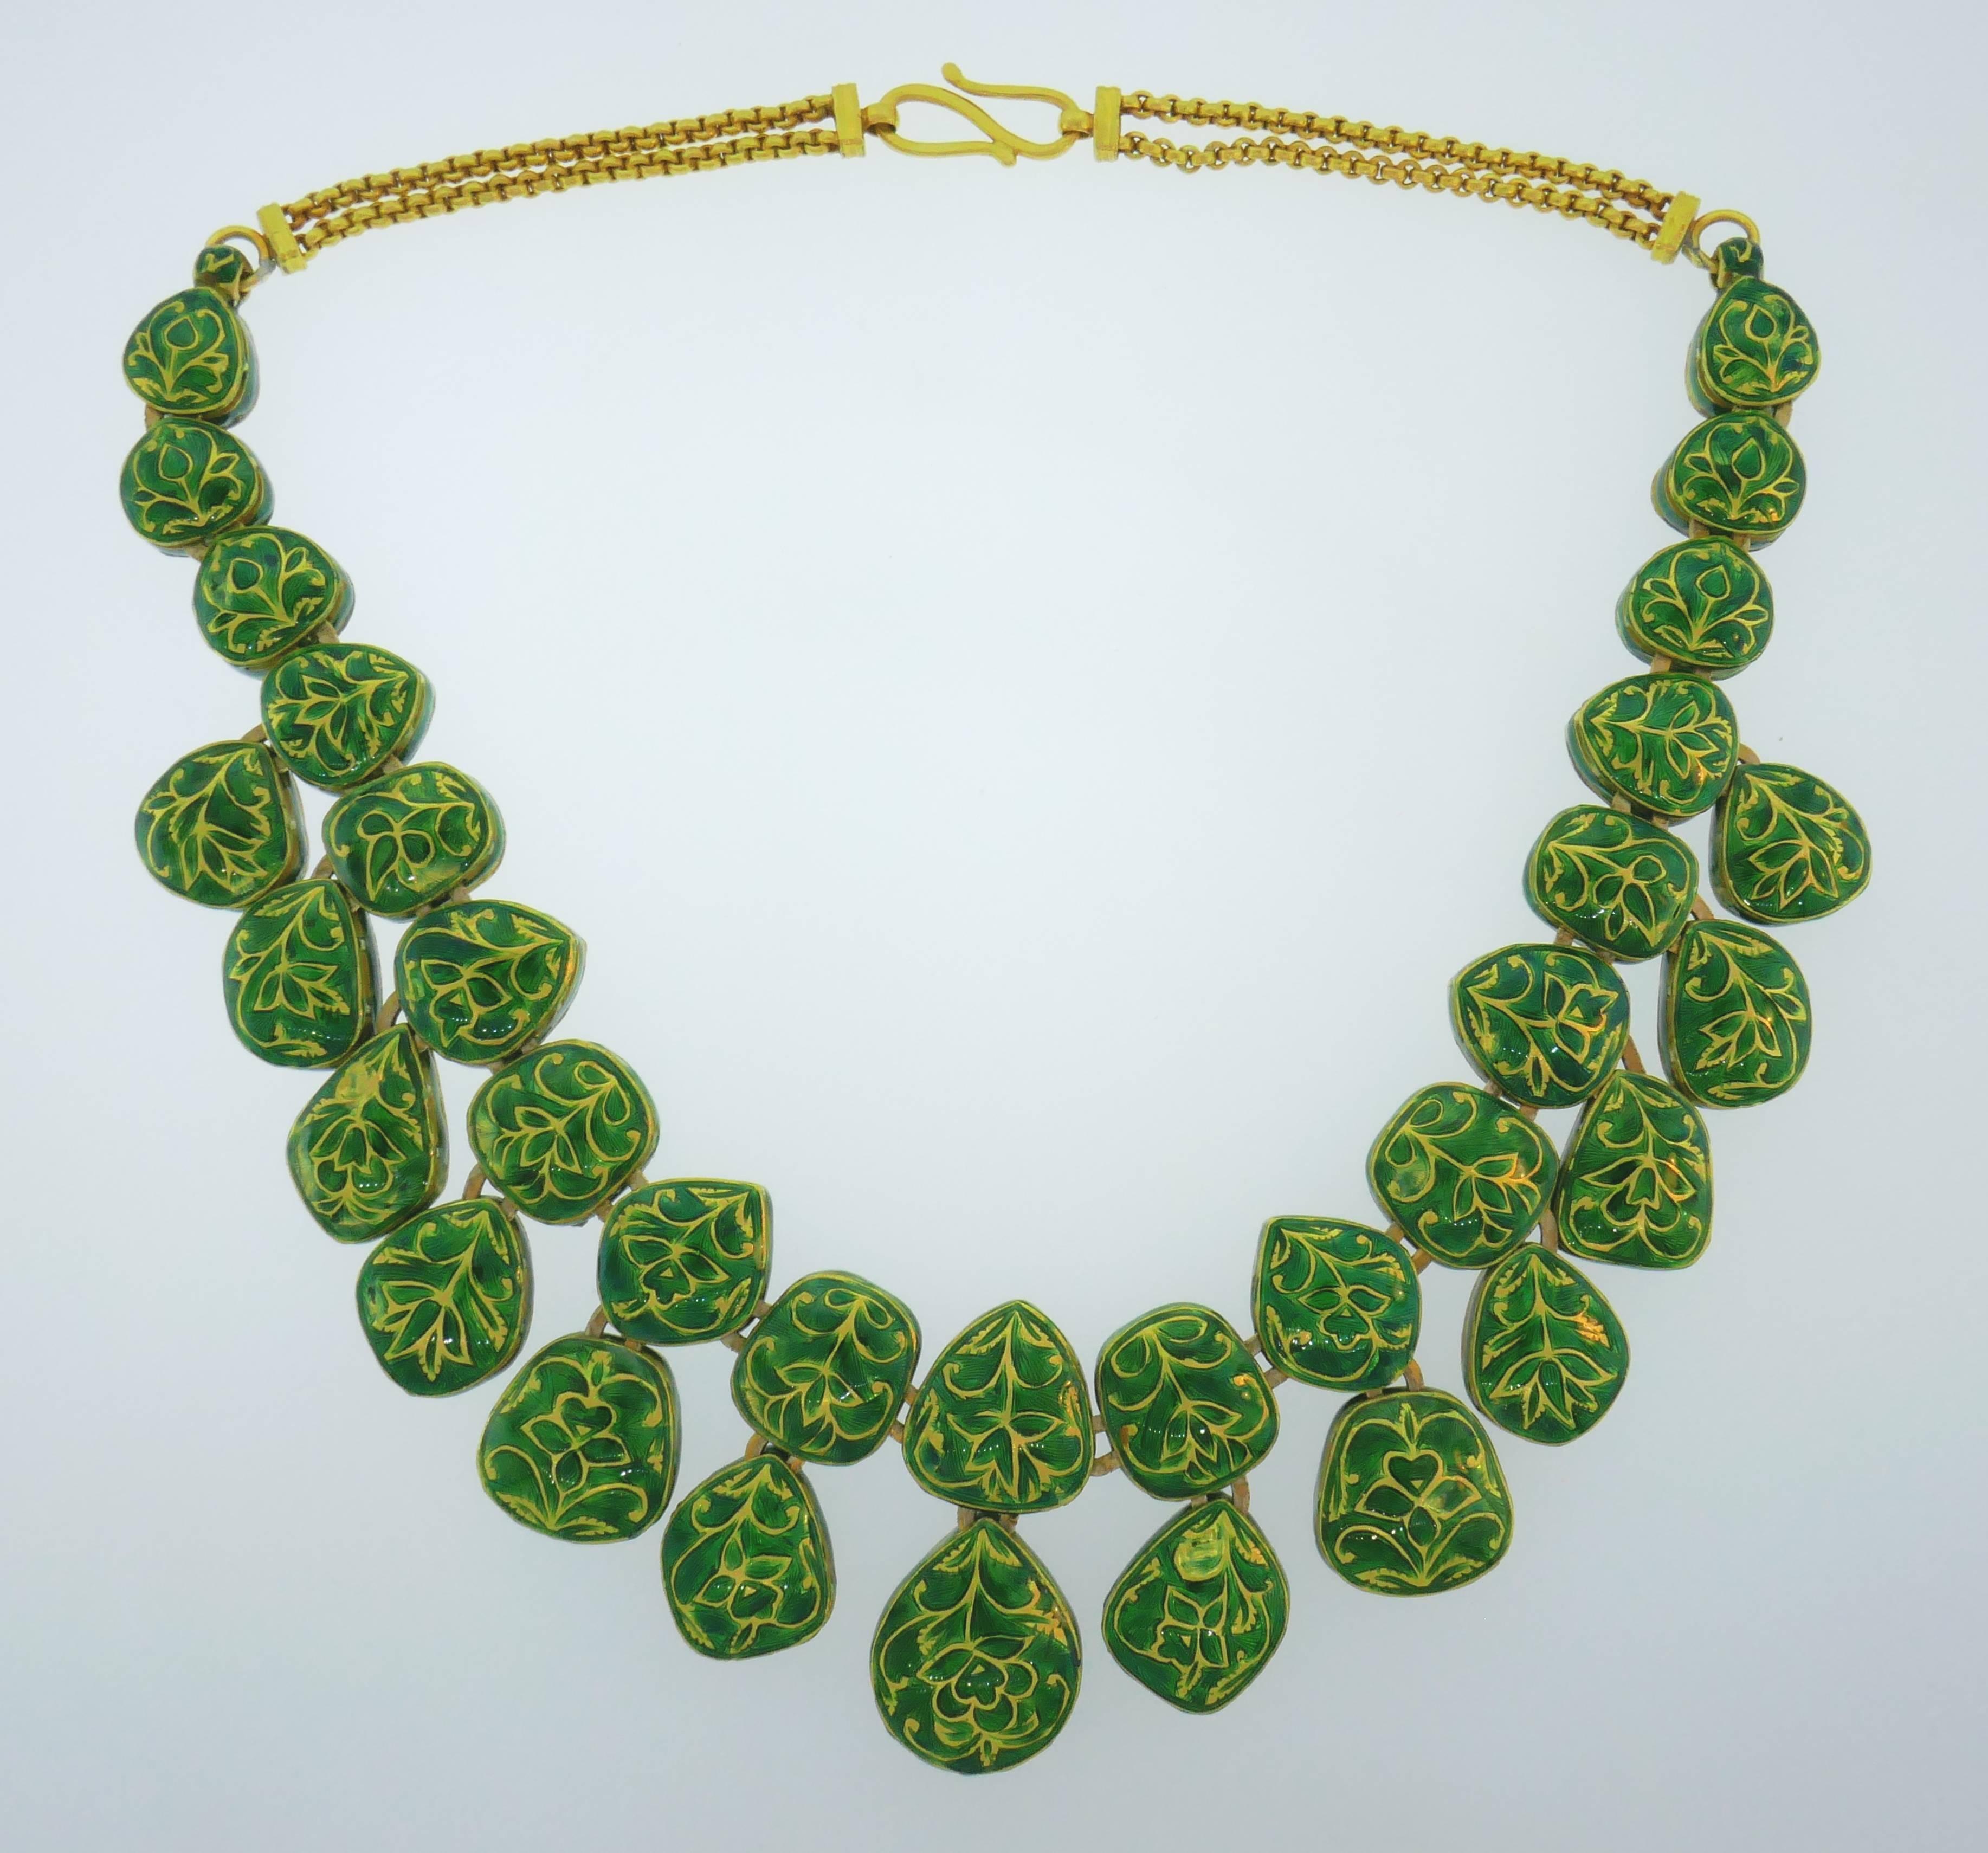 Bold and striking double-sided necklace.  Making a statement yet wearable, the necklace is a great addition to your jewelry collection. 
The necklace is made of 18 karat yellow gold, green enamel and rose cut diamonds.
It is 17 inches x 1-1/2 inches